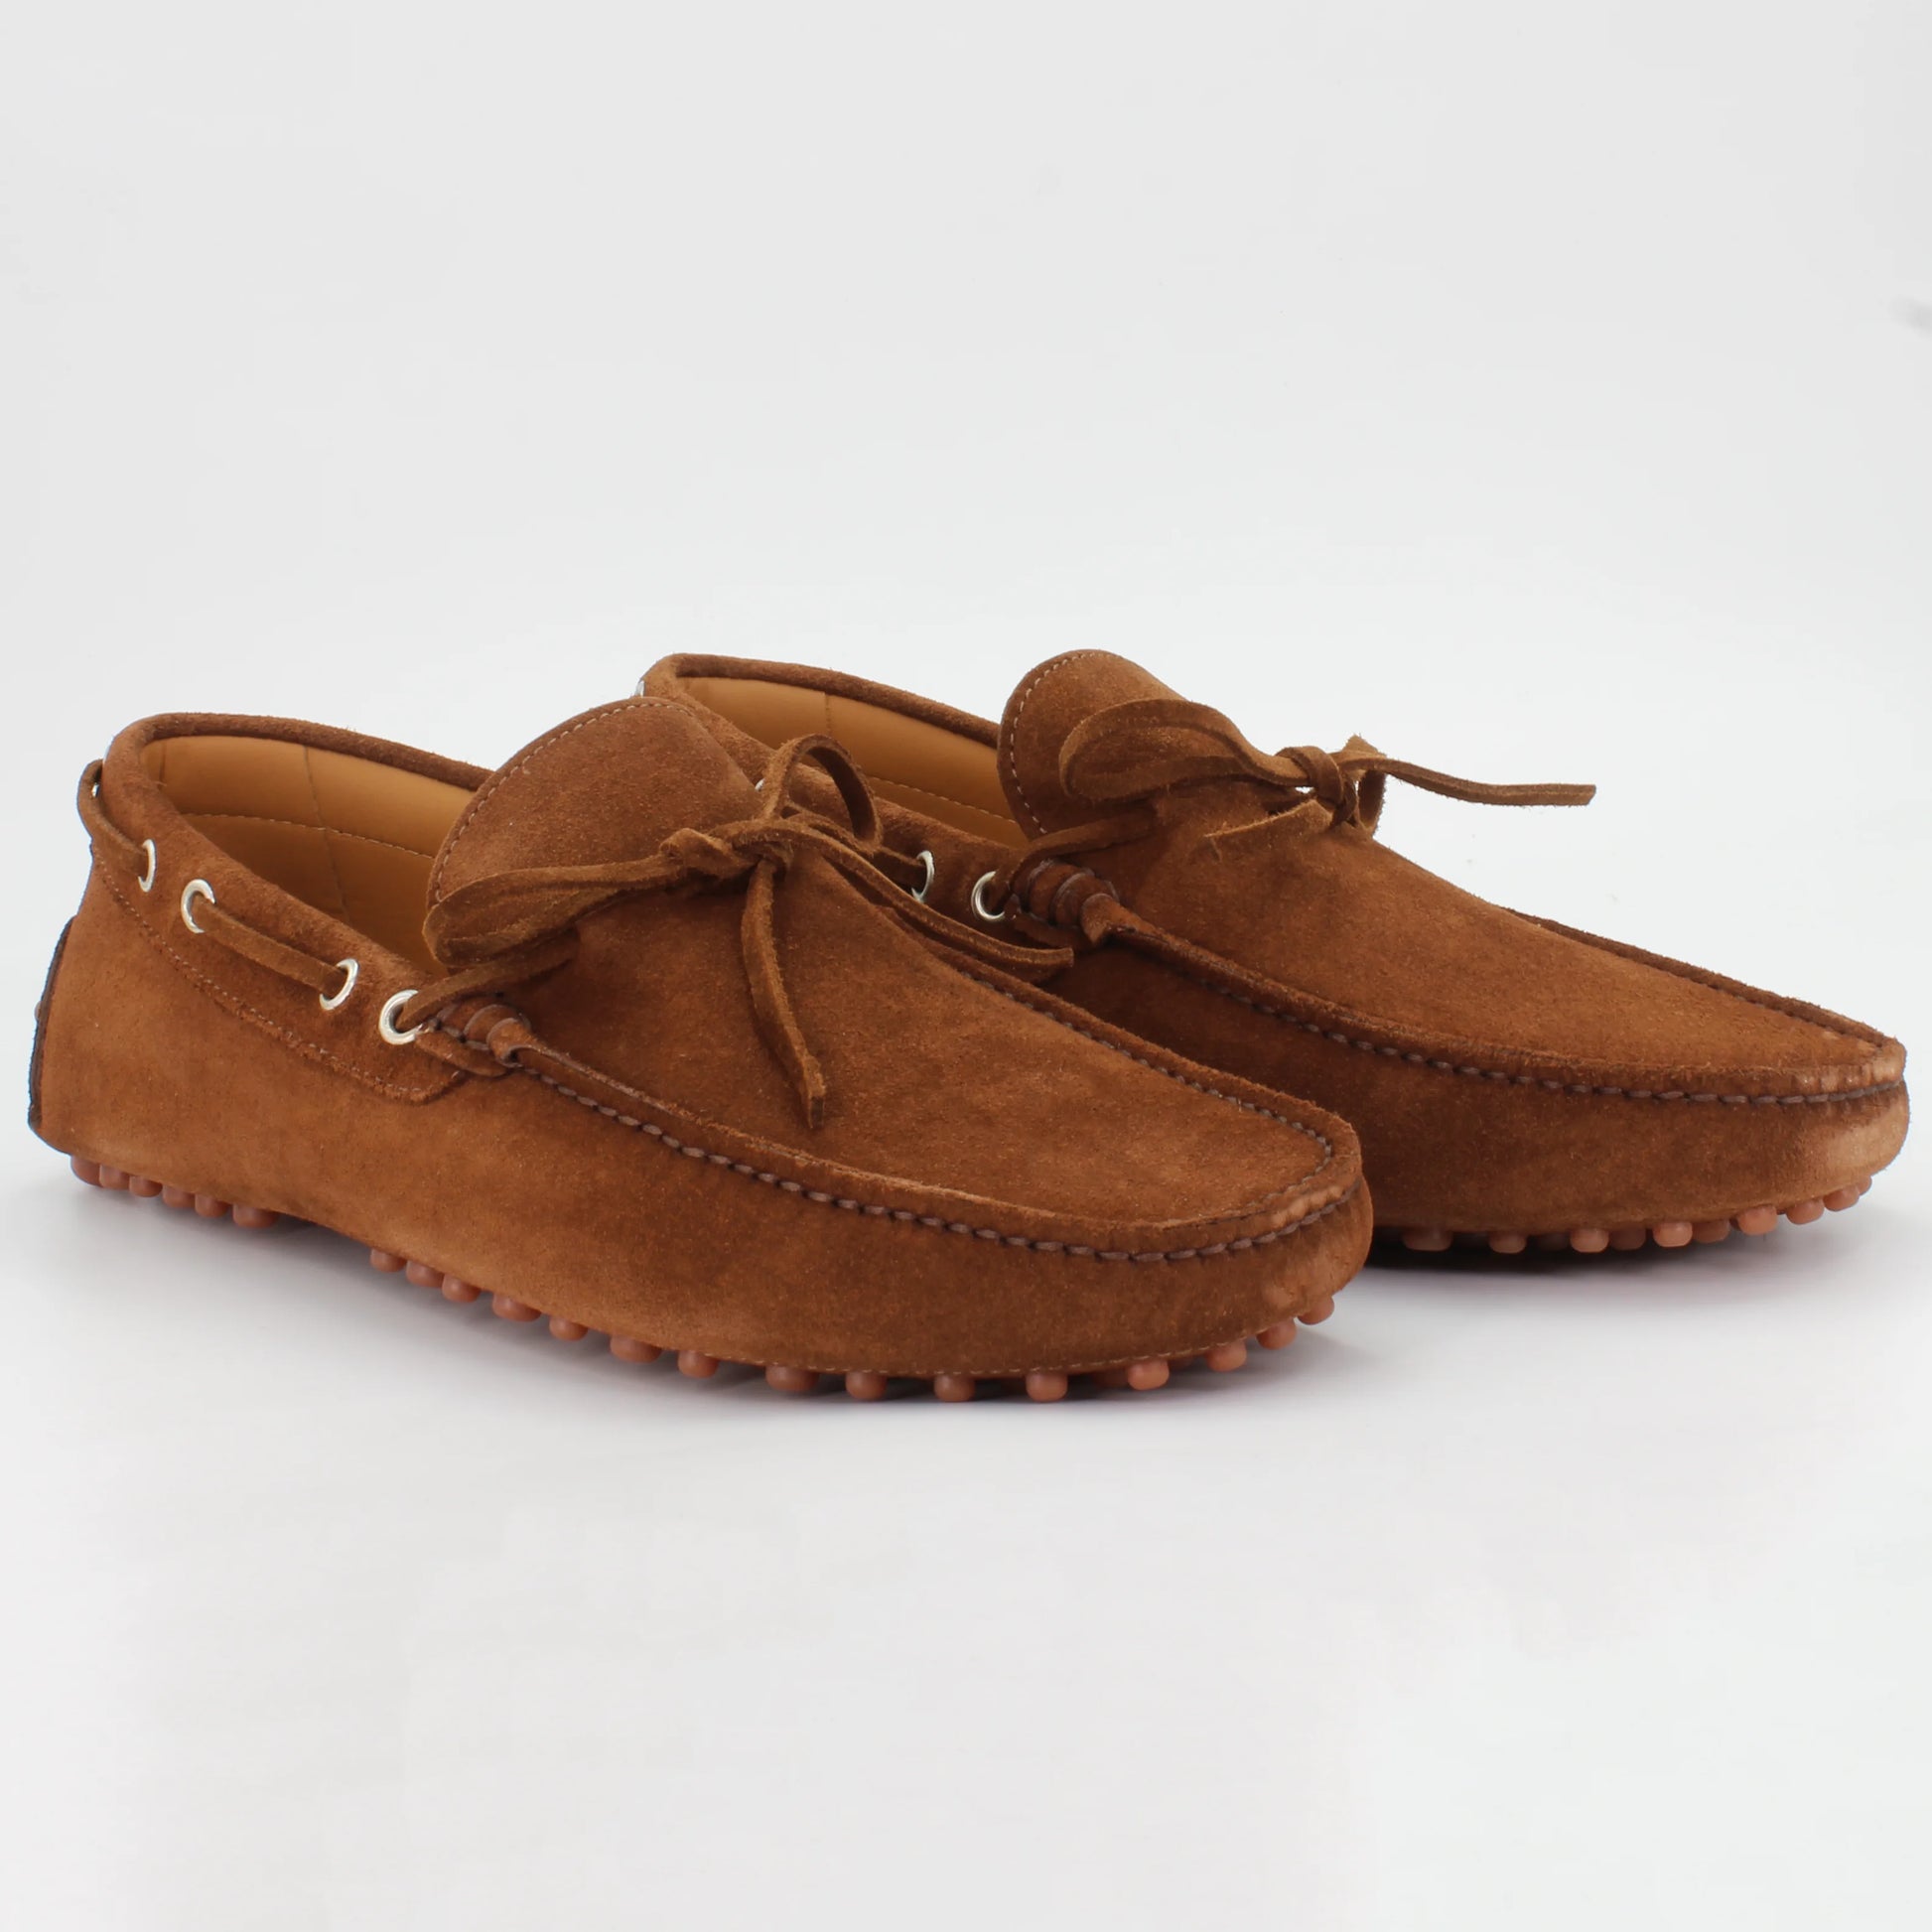 Shop Handmade Italian Leather moccasin in chestnut velour (UO460003) or browse our range of hand-made Italian shoes for men in leather or suede in-store at Aliverti Cape Town, or shop online. We deliver in South Africa & offer multiple payment plans as well as accept multiple safe & secure payment methods.